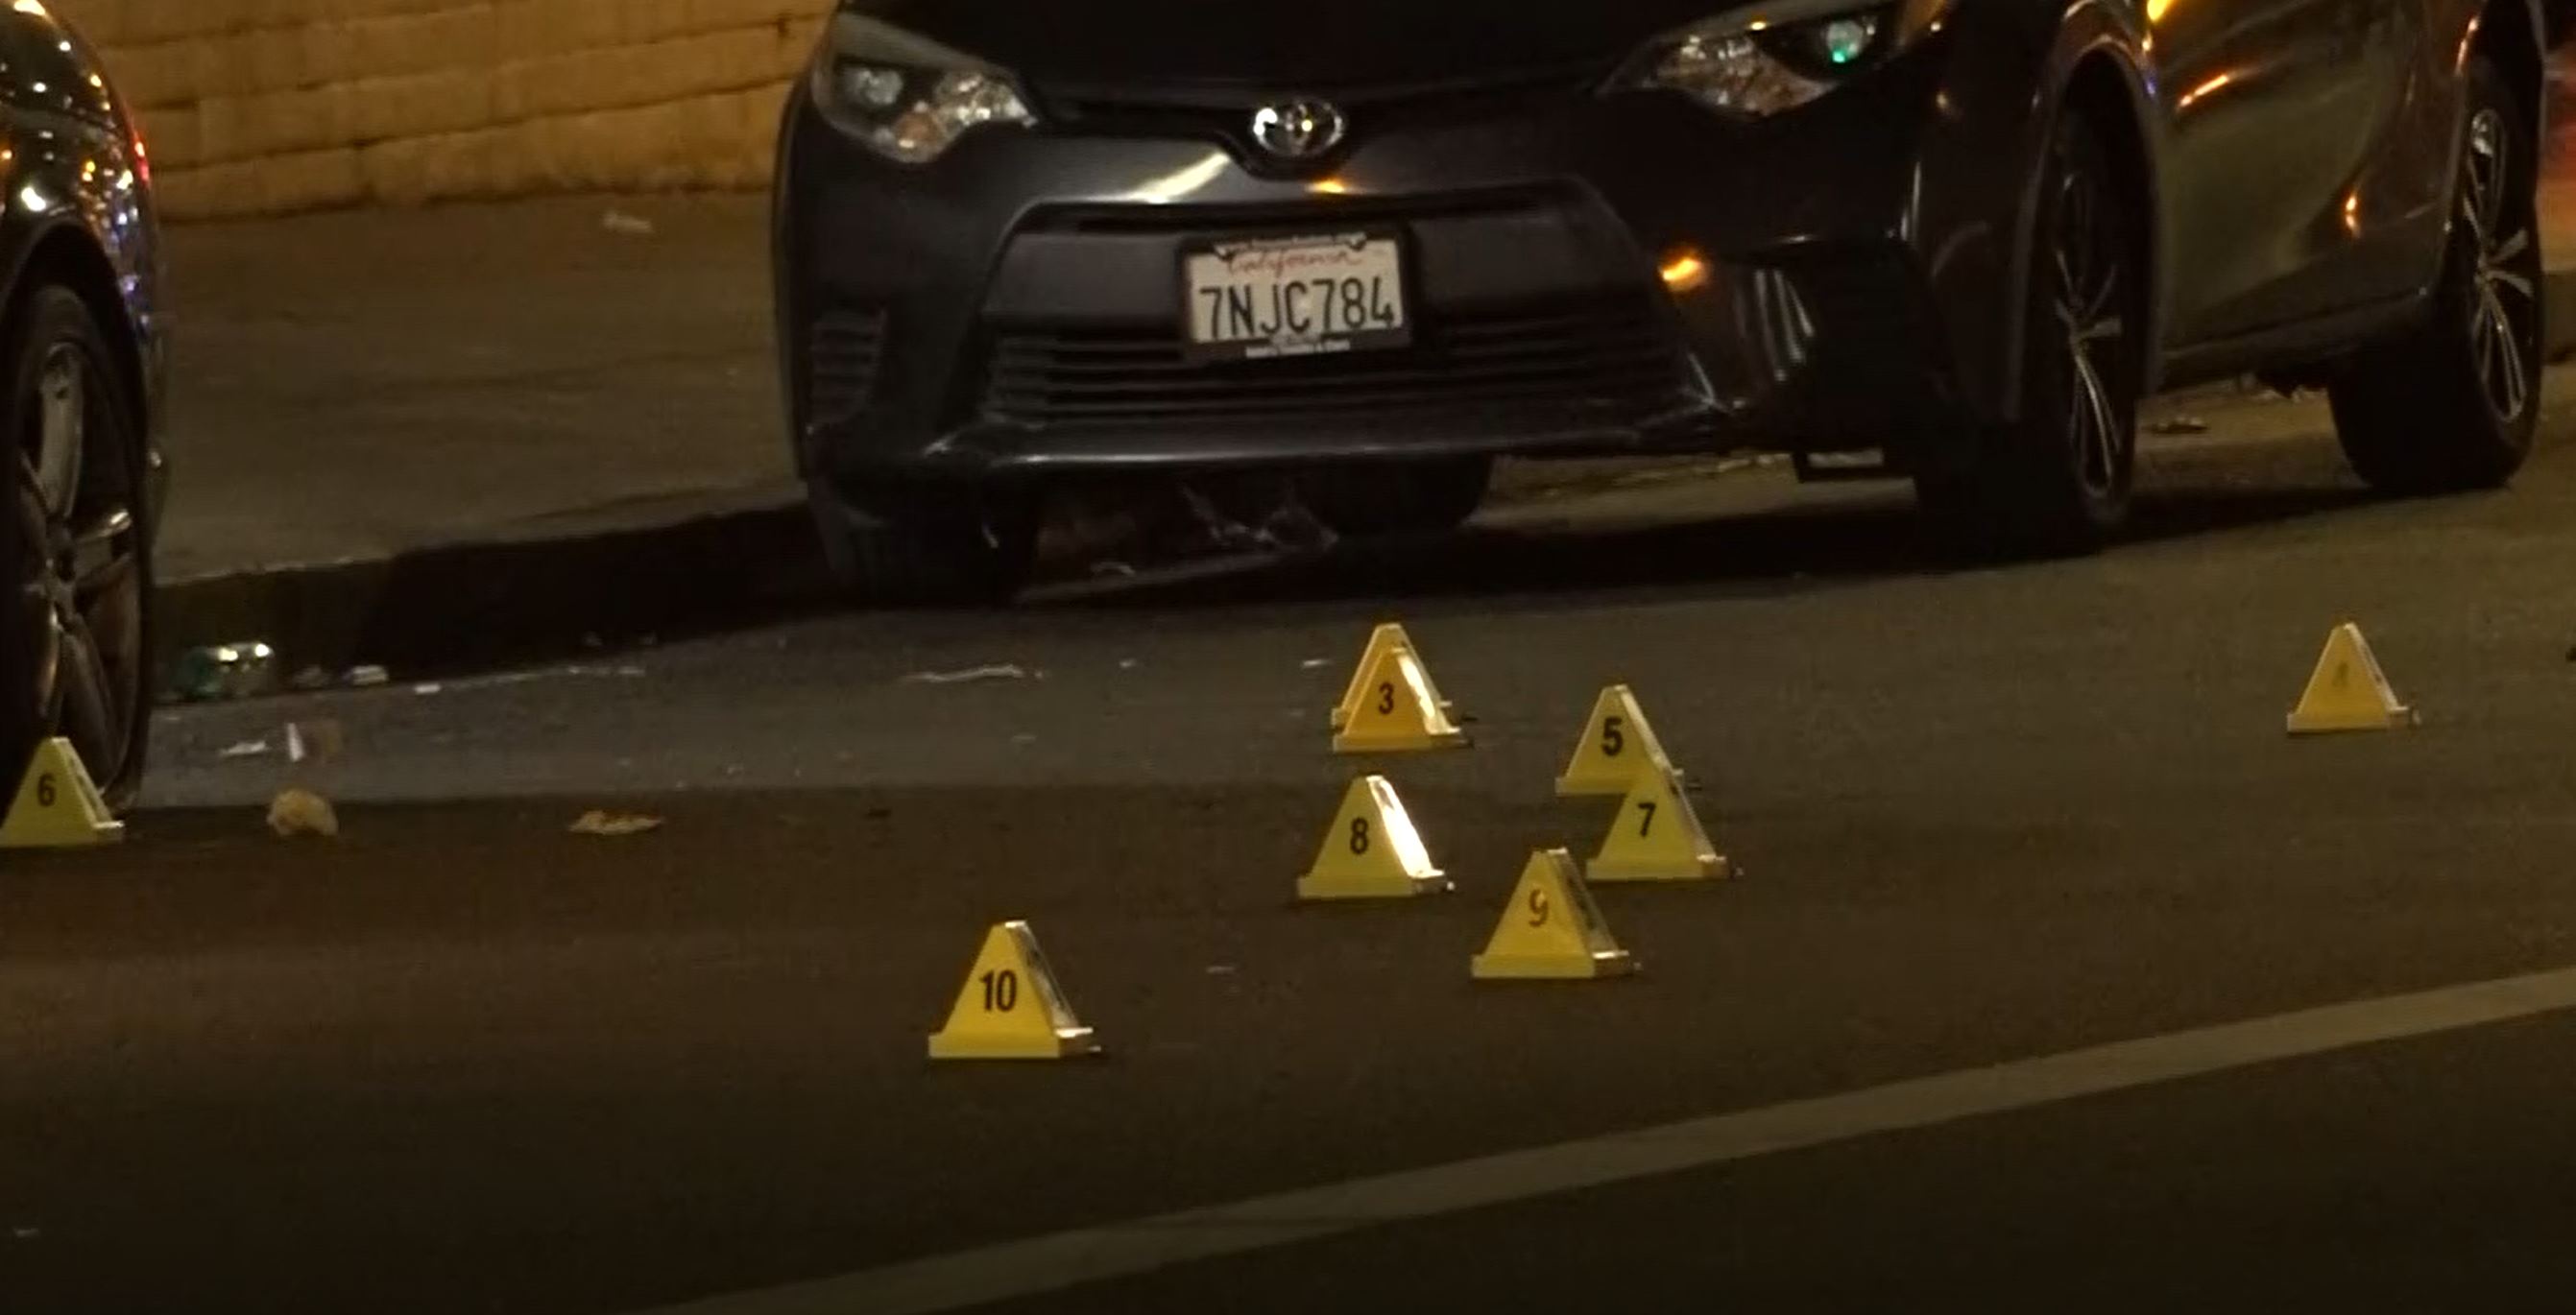 Oakland Shooting Early Tuesday Leaves 2 Adults in Critical Condition